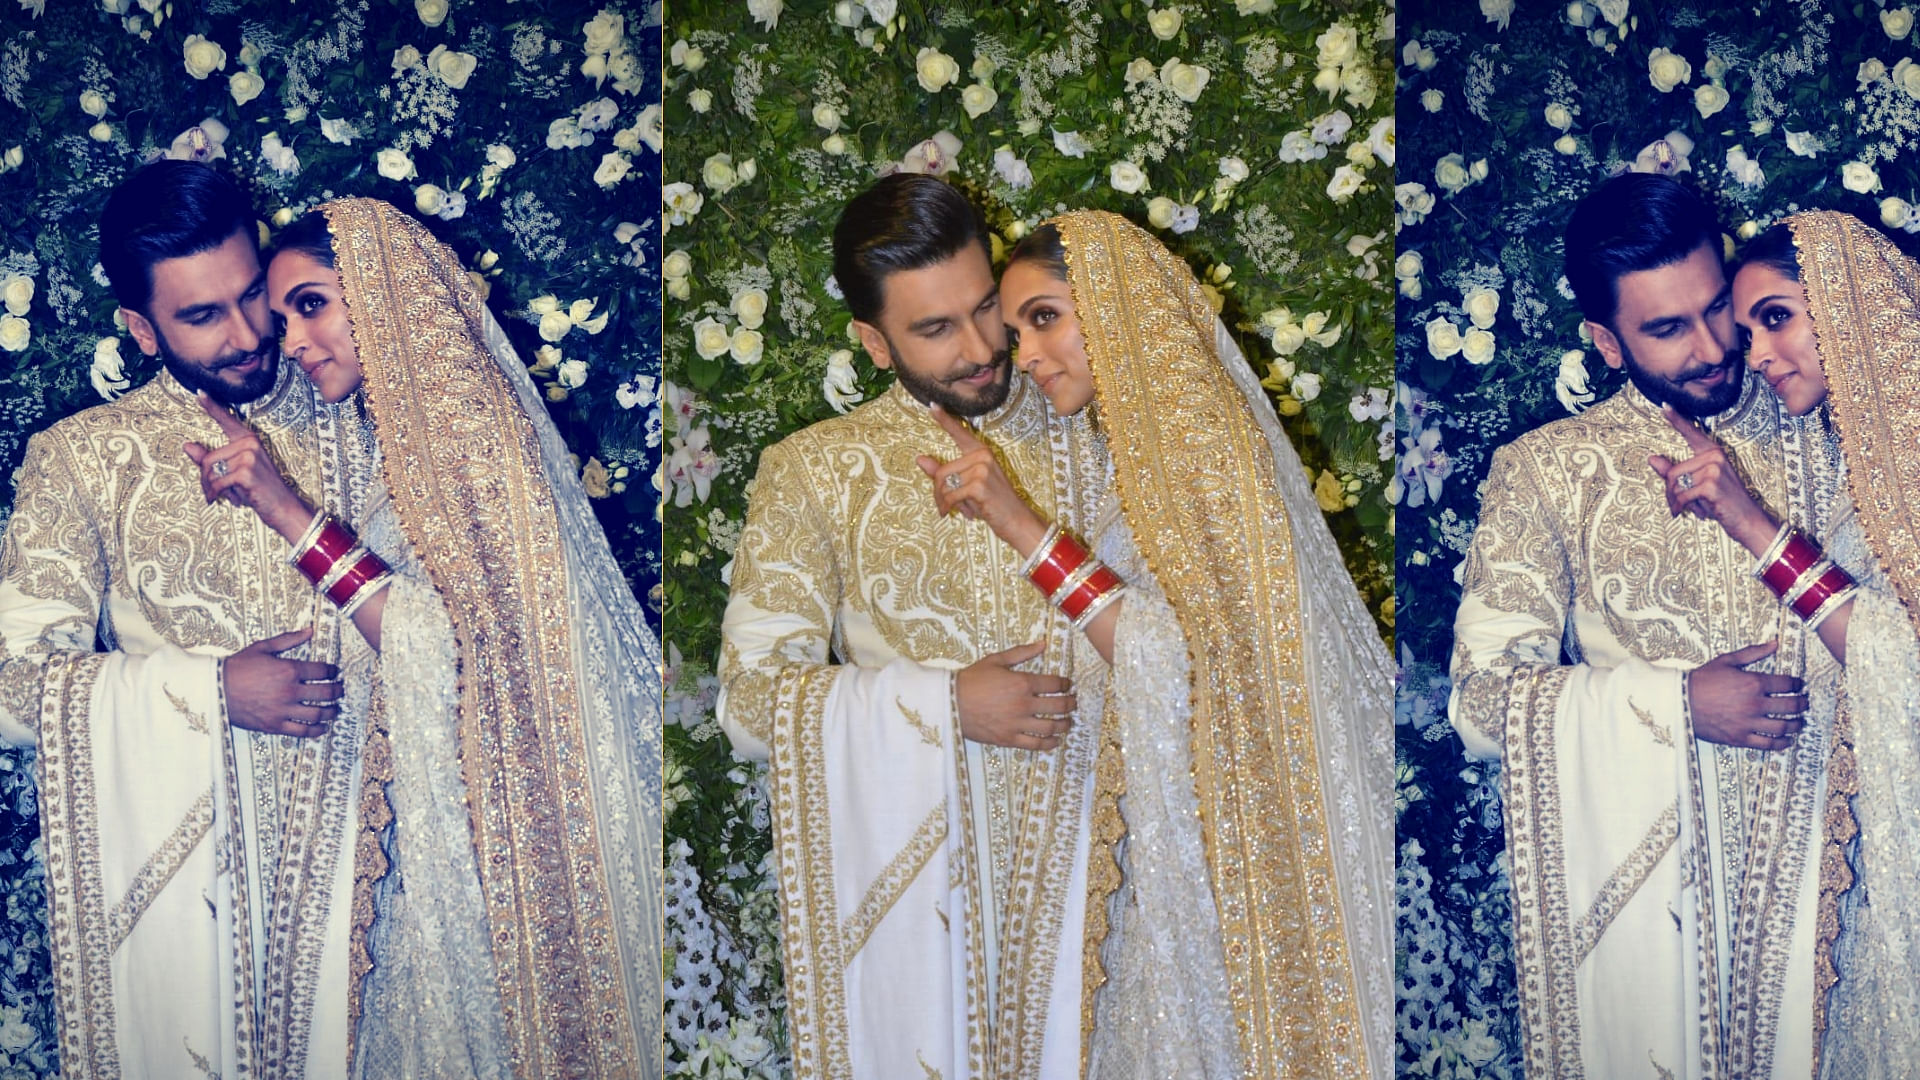 Deepika Padukone and Ranveer Singh’s Mumbai reception may be missing the B-Town glam but the couple is making up for it with their filmy, ‘lovey-dovey’ shenanigans.